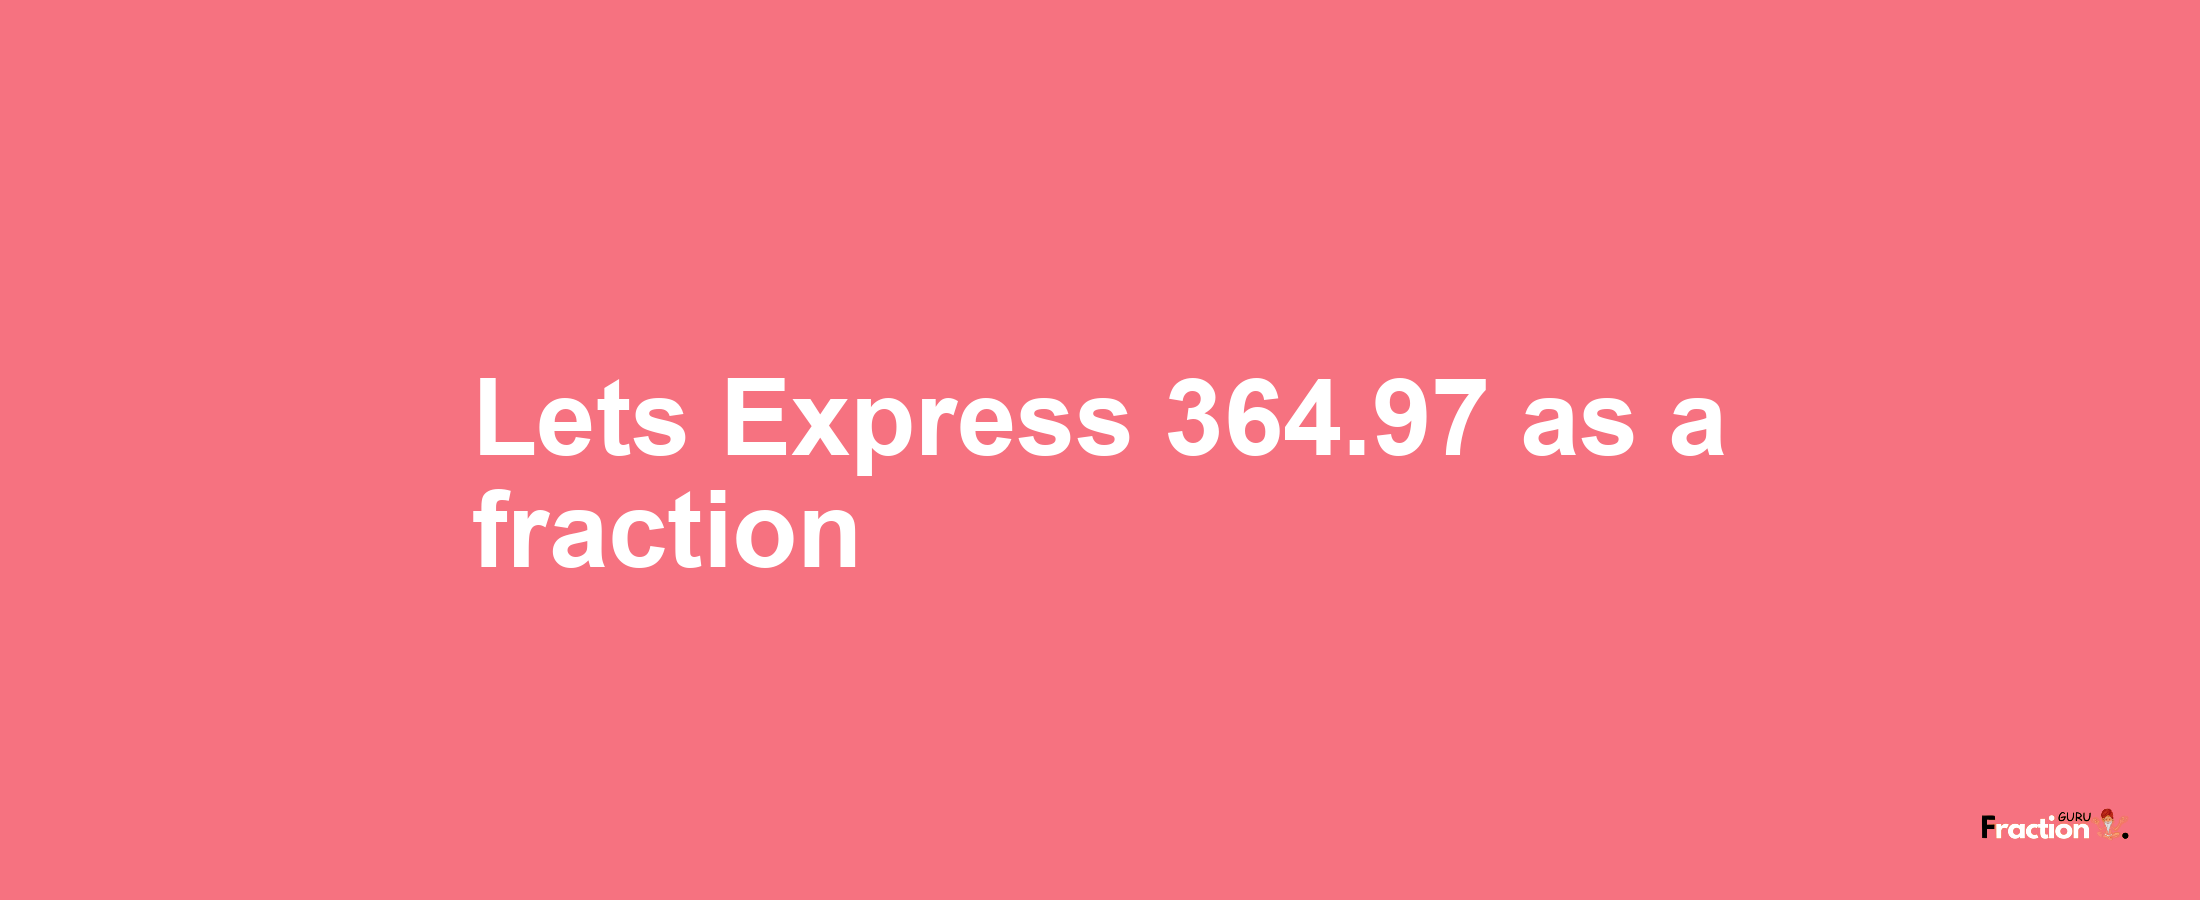 Lets Express 364.97 as afraction